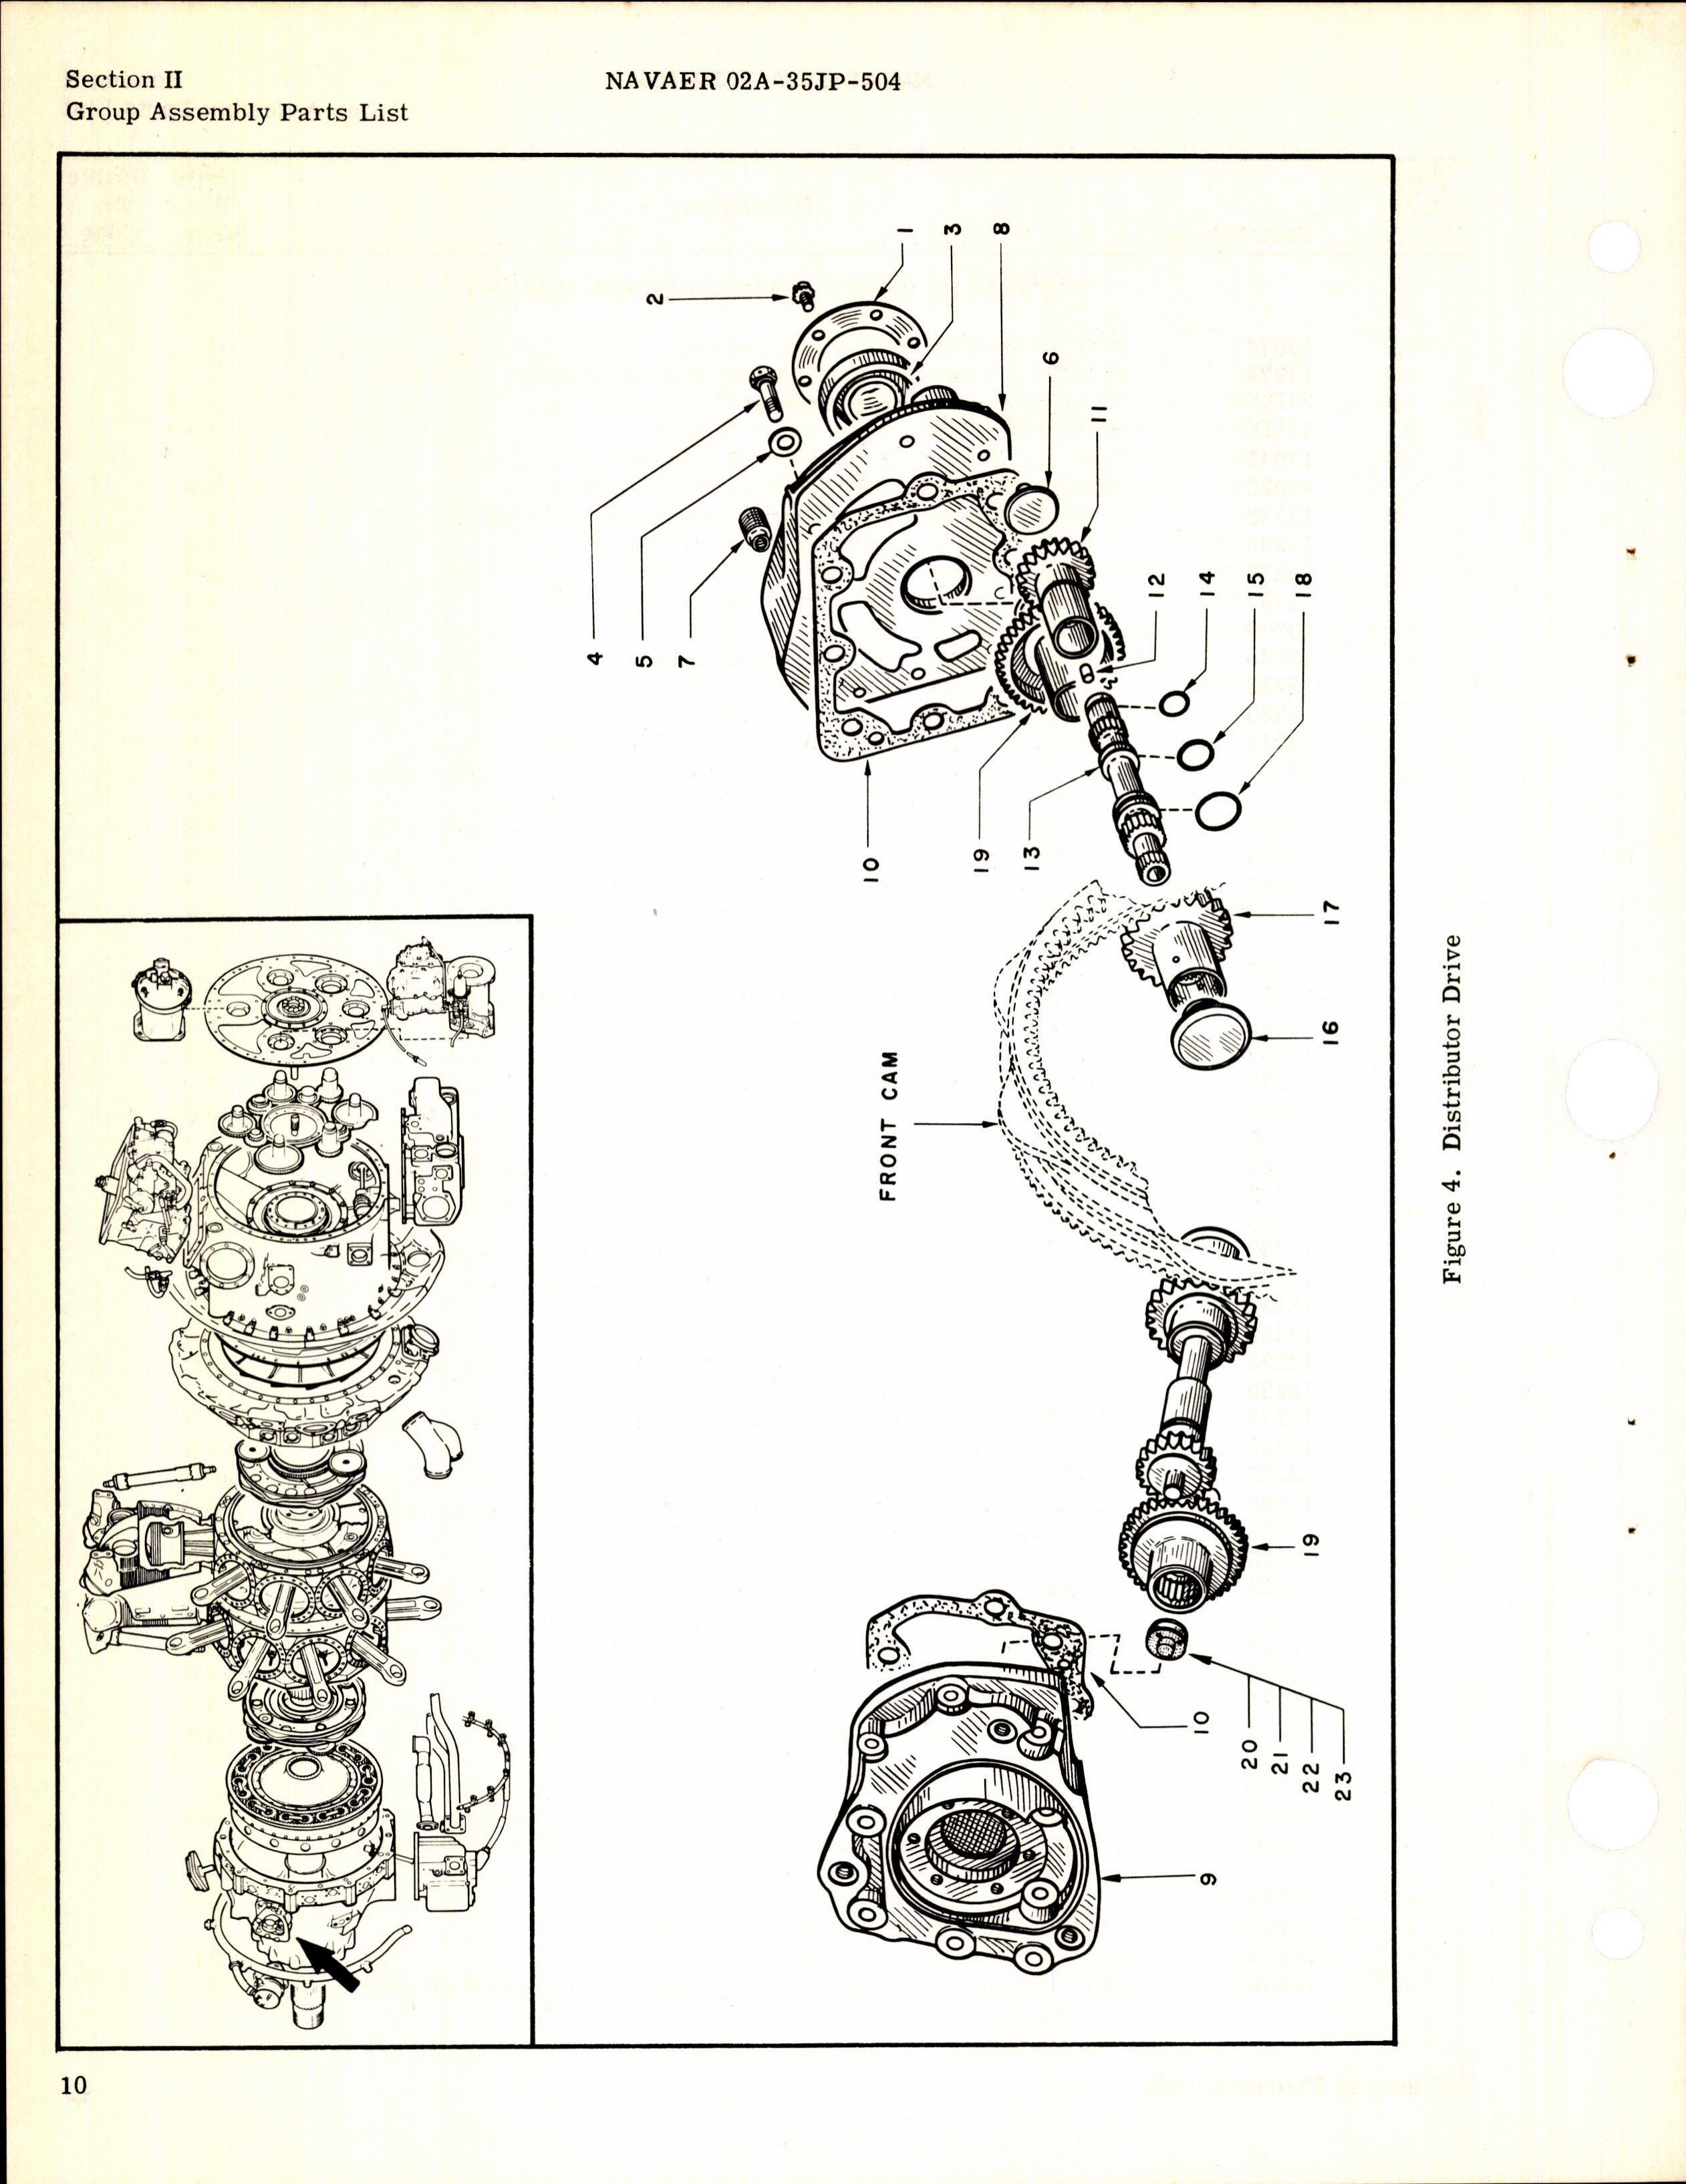 Sample page 10 from AirCorps Library document: Illustrated Parts Breakdown for R-3350-26WB Engine